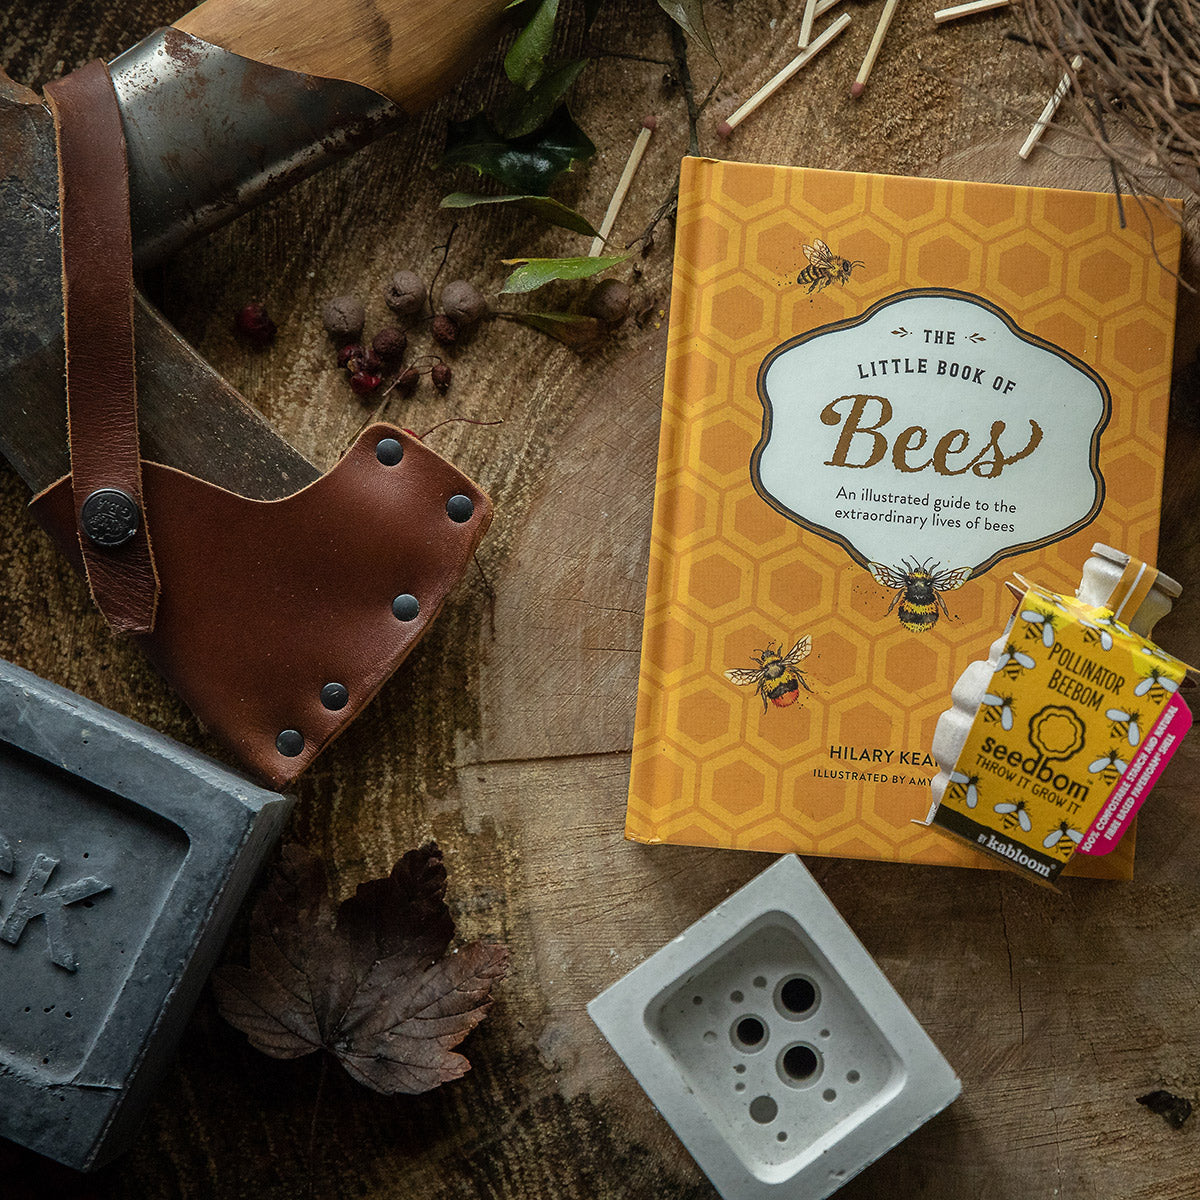 Bee lover gift bundle including bee hotel, book and wildflower seeds, shown on wooden background